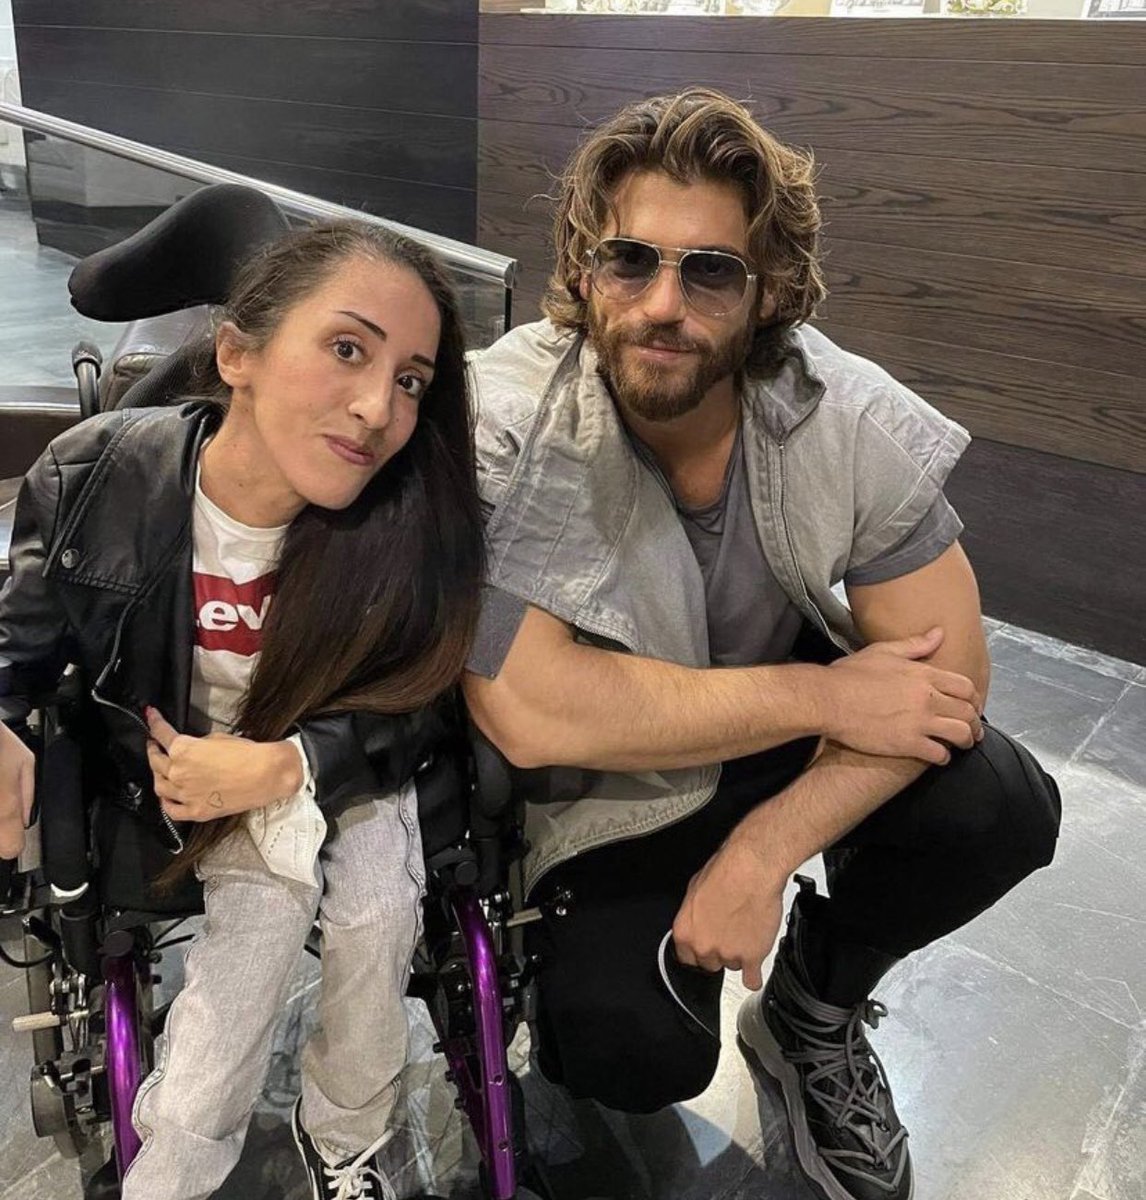 Meeting with special fan 🥰 For his Golden sensitive heart ❤️ I vote #CanYaman for The most handsome face of 2021 #100MostHandsomeMen2021 @tccandler